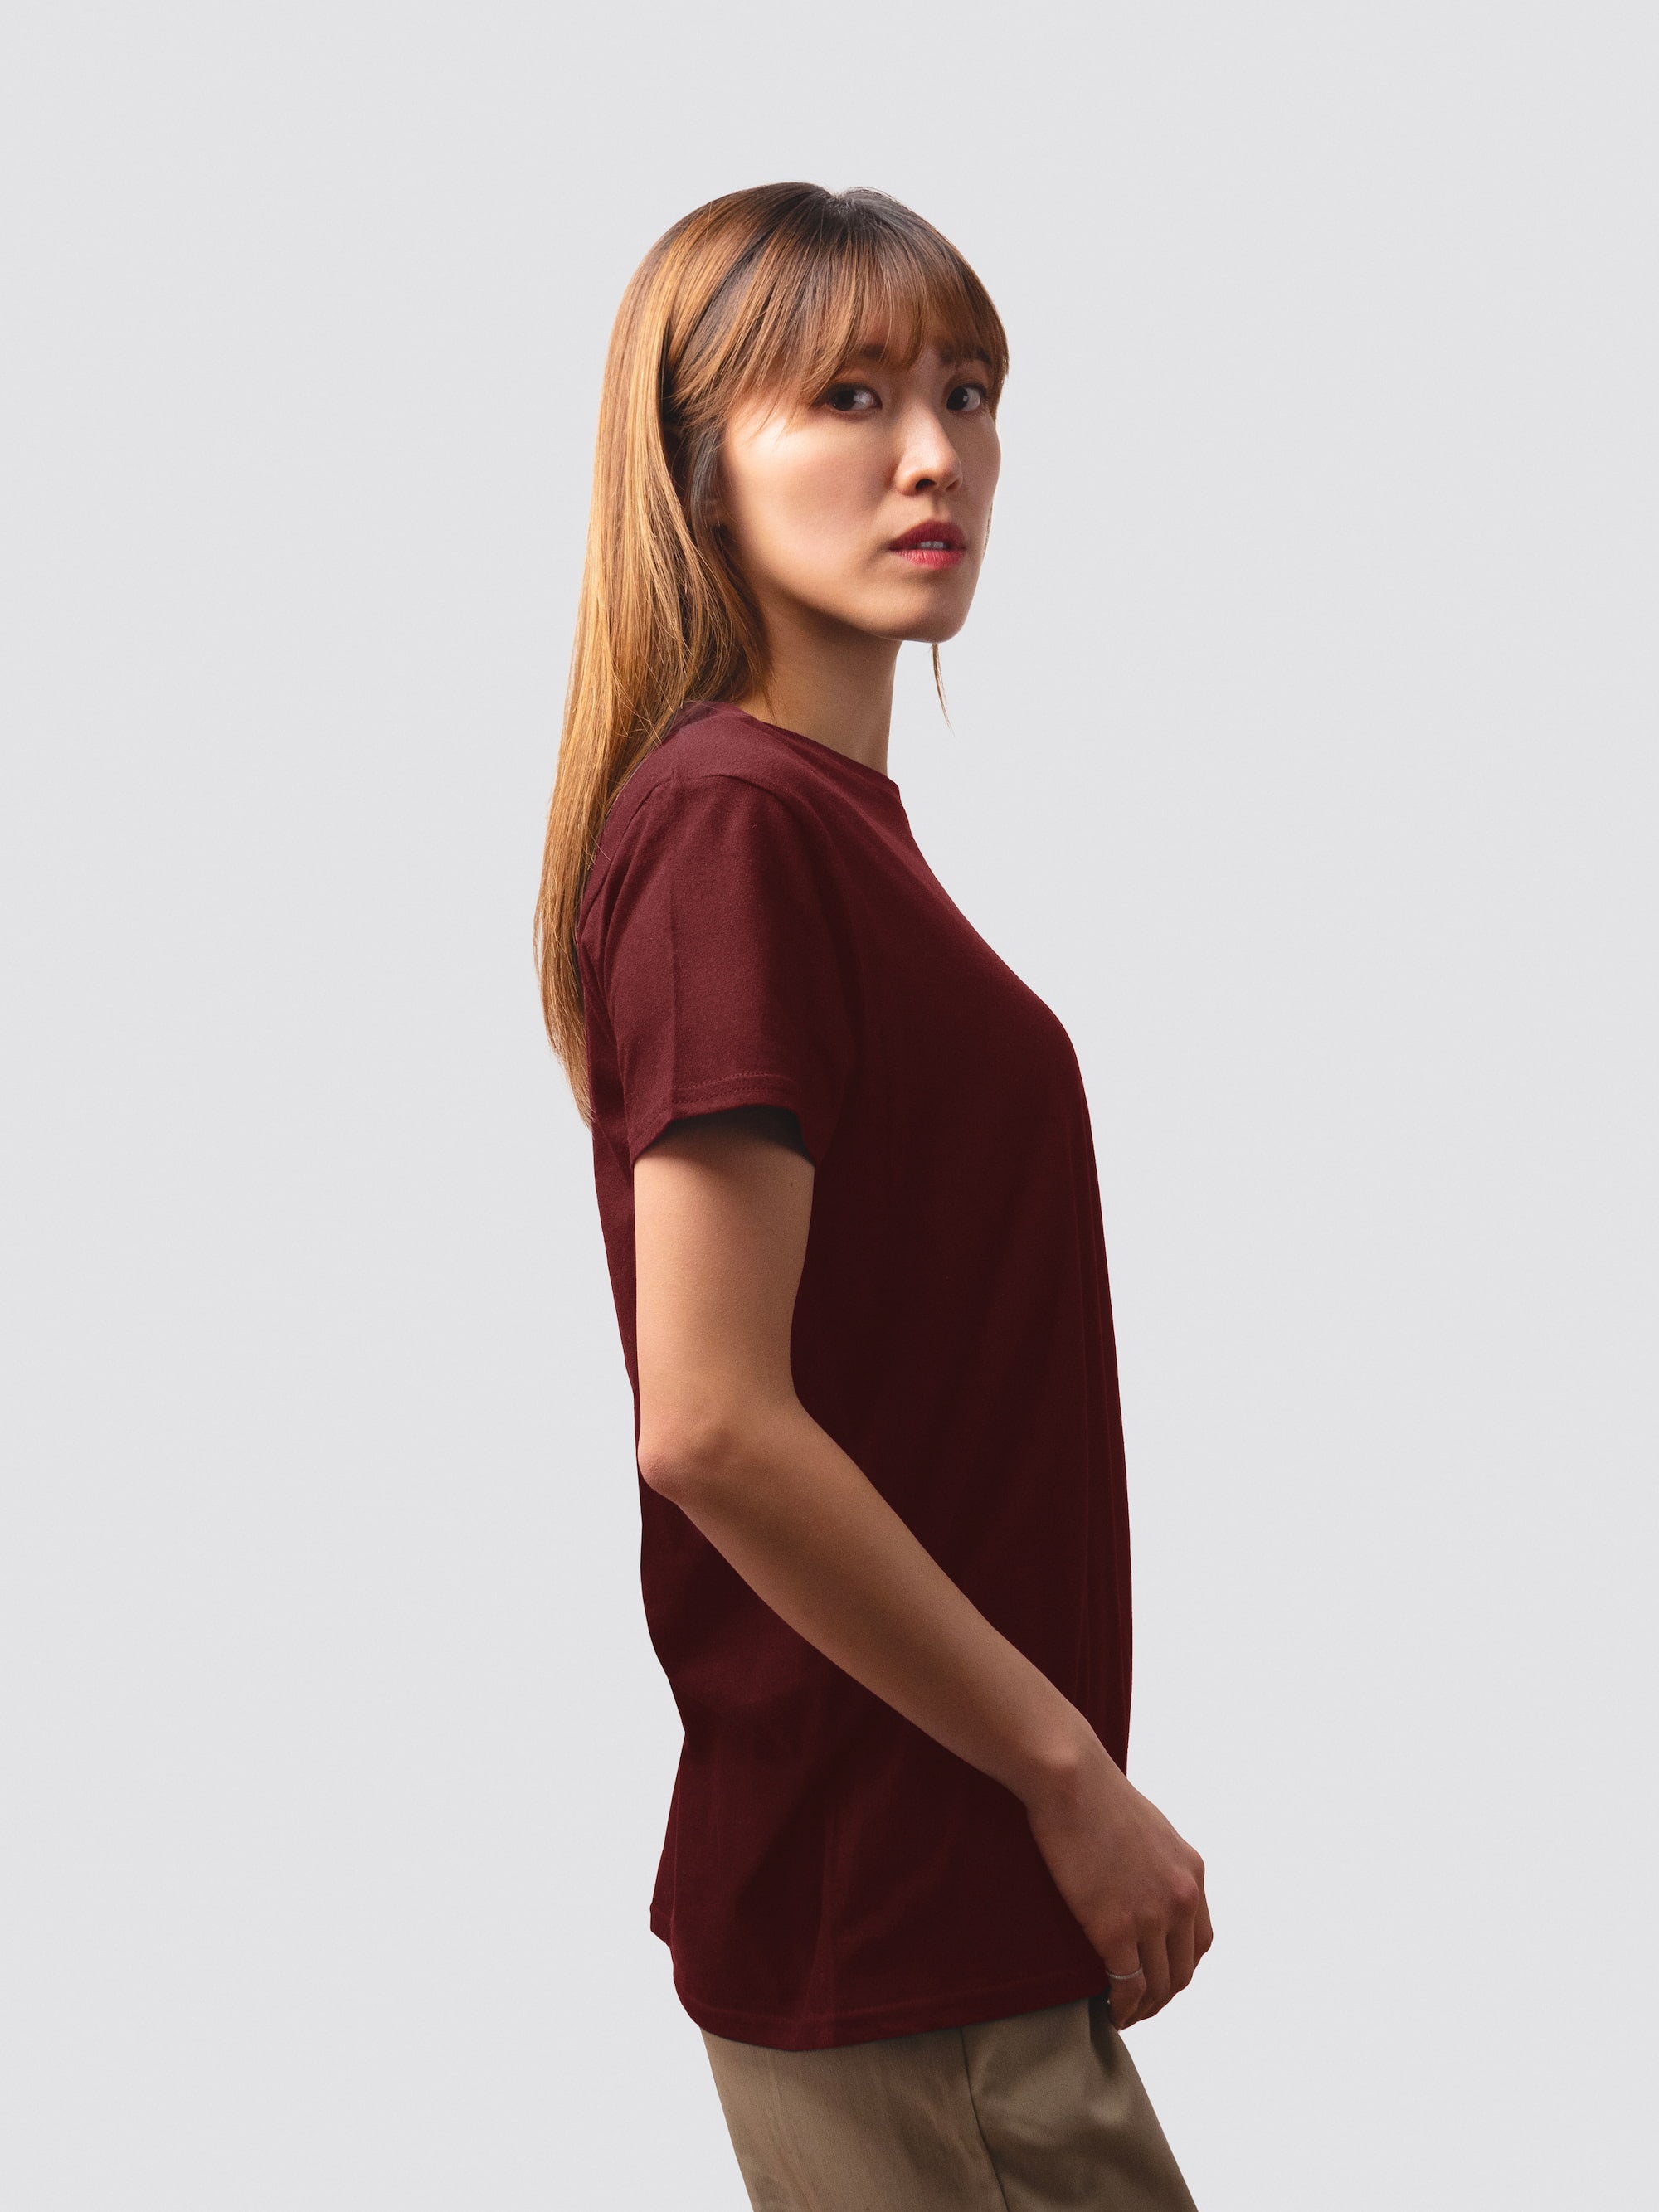 Redbird Apparel burgundy t-shirt, crafted form sustainable materials